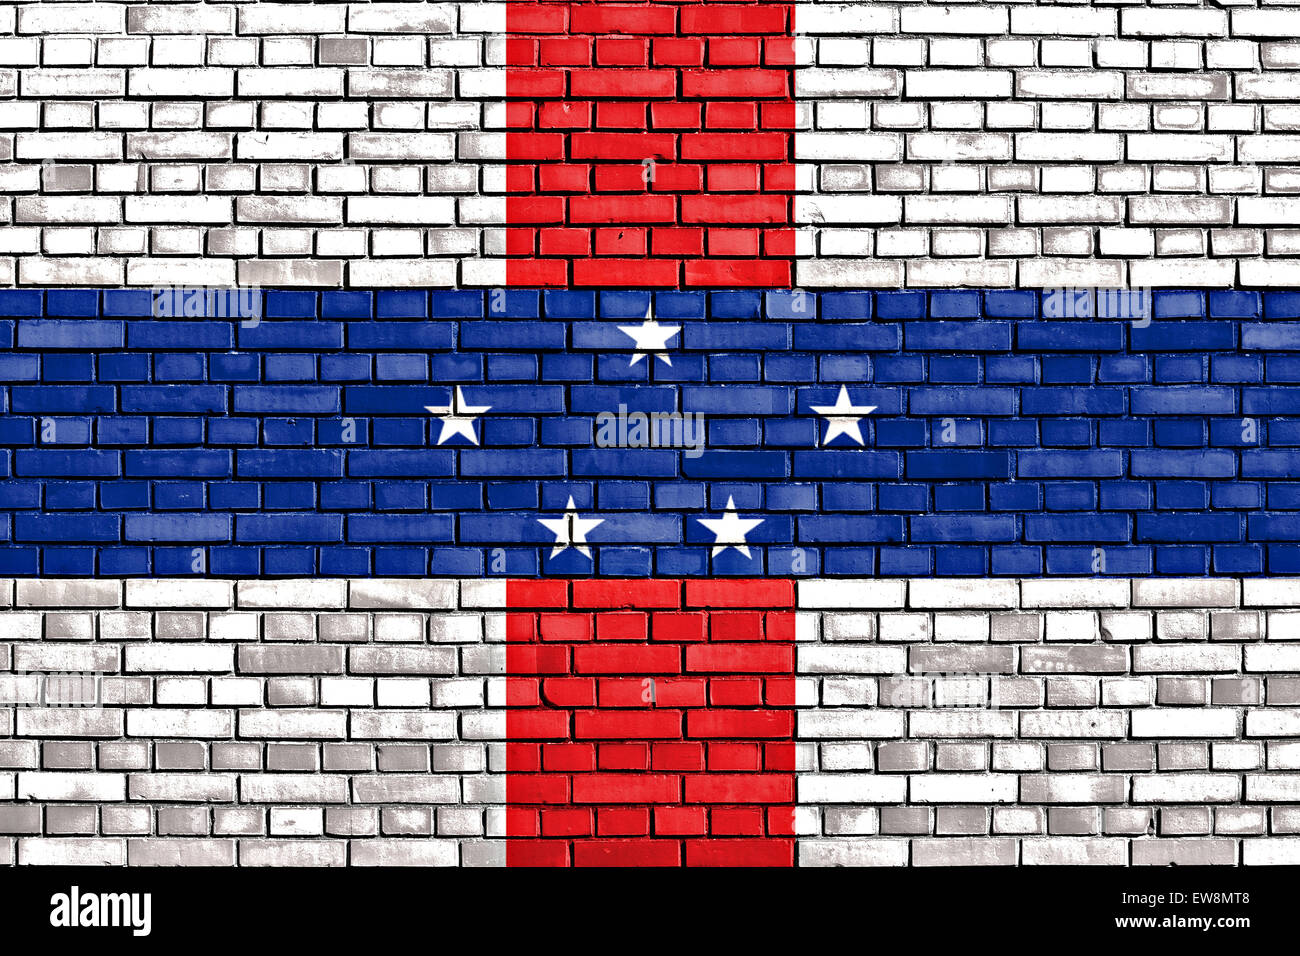 flag of Netherlands Antilles painted on brick wall Stock Photo